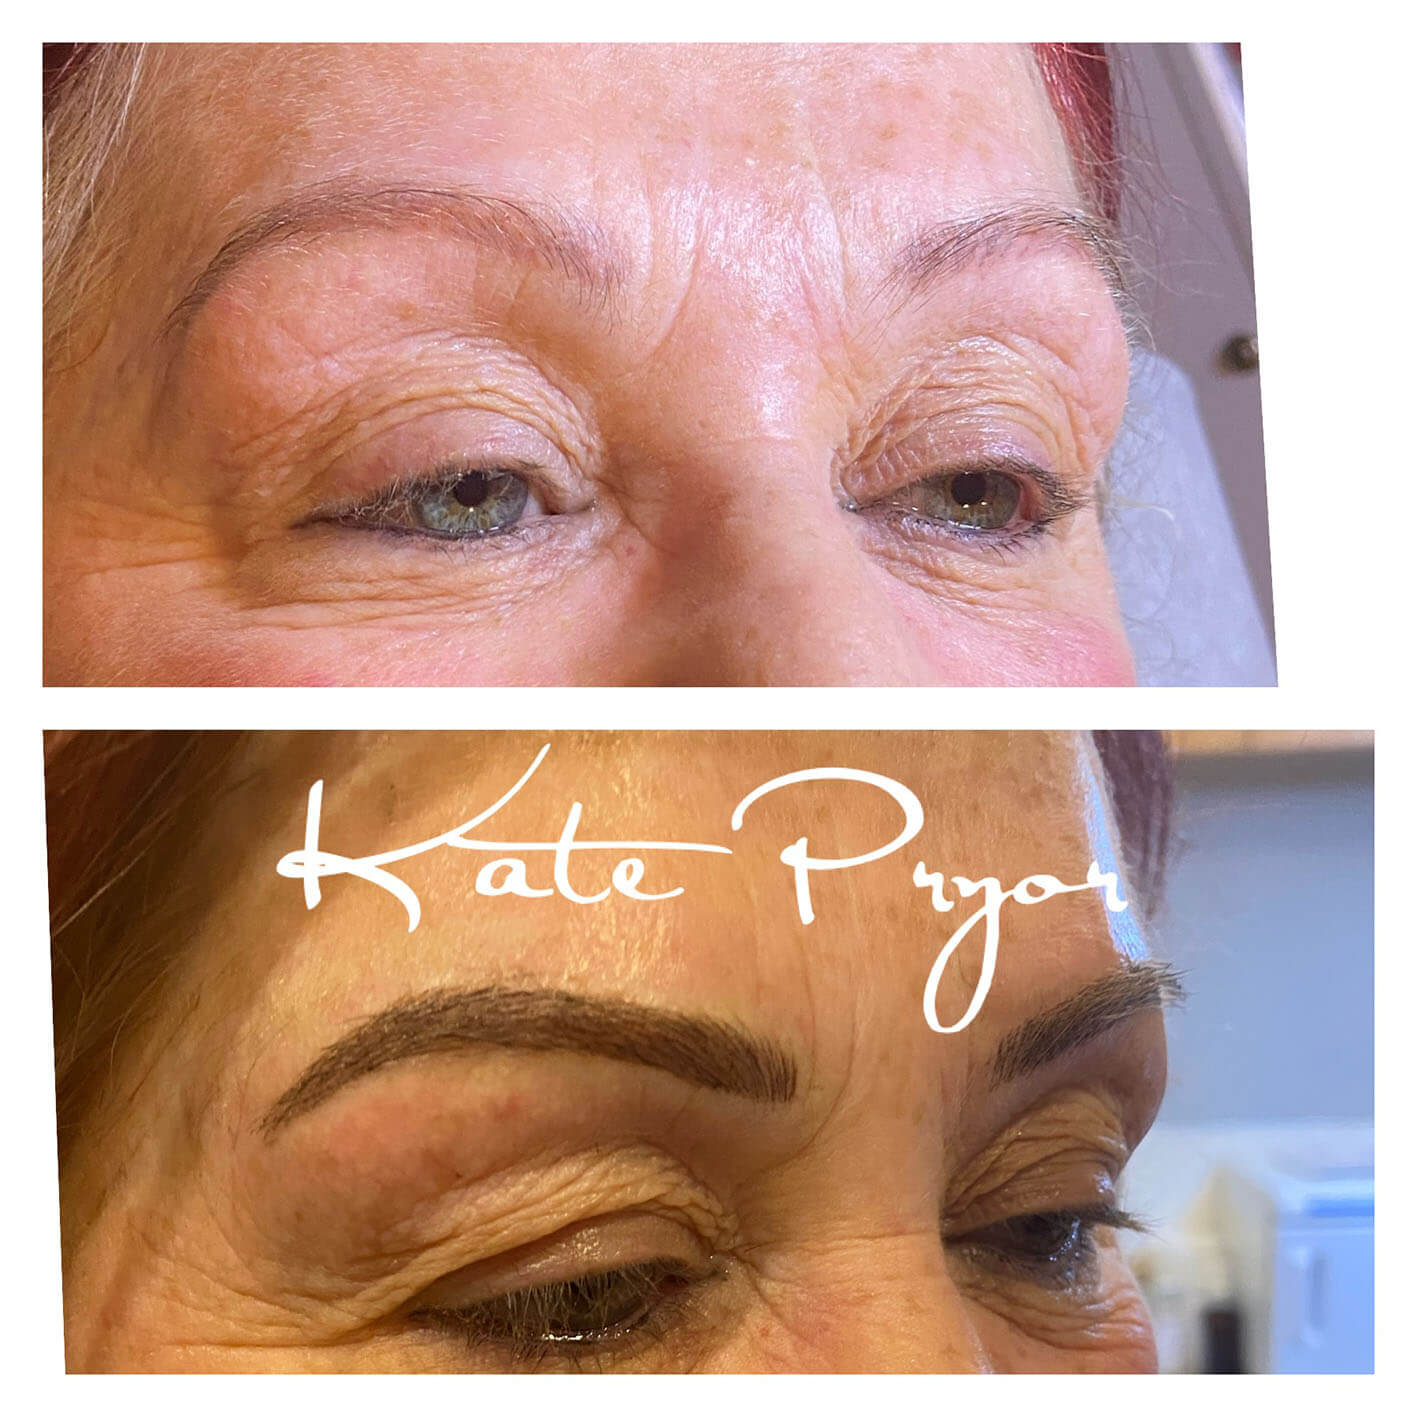 Elite-Skin-Cosmetic-Tattooing-Kate-Pryor-Before-After-8